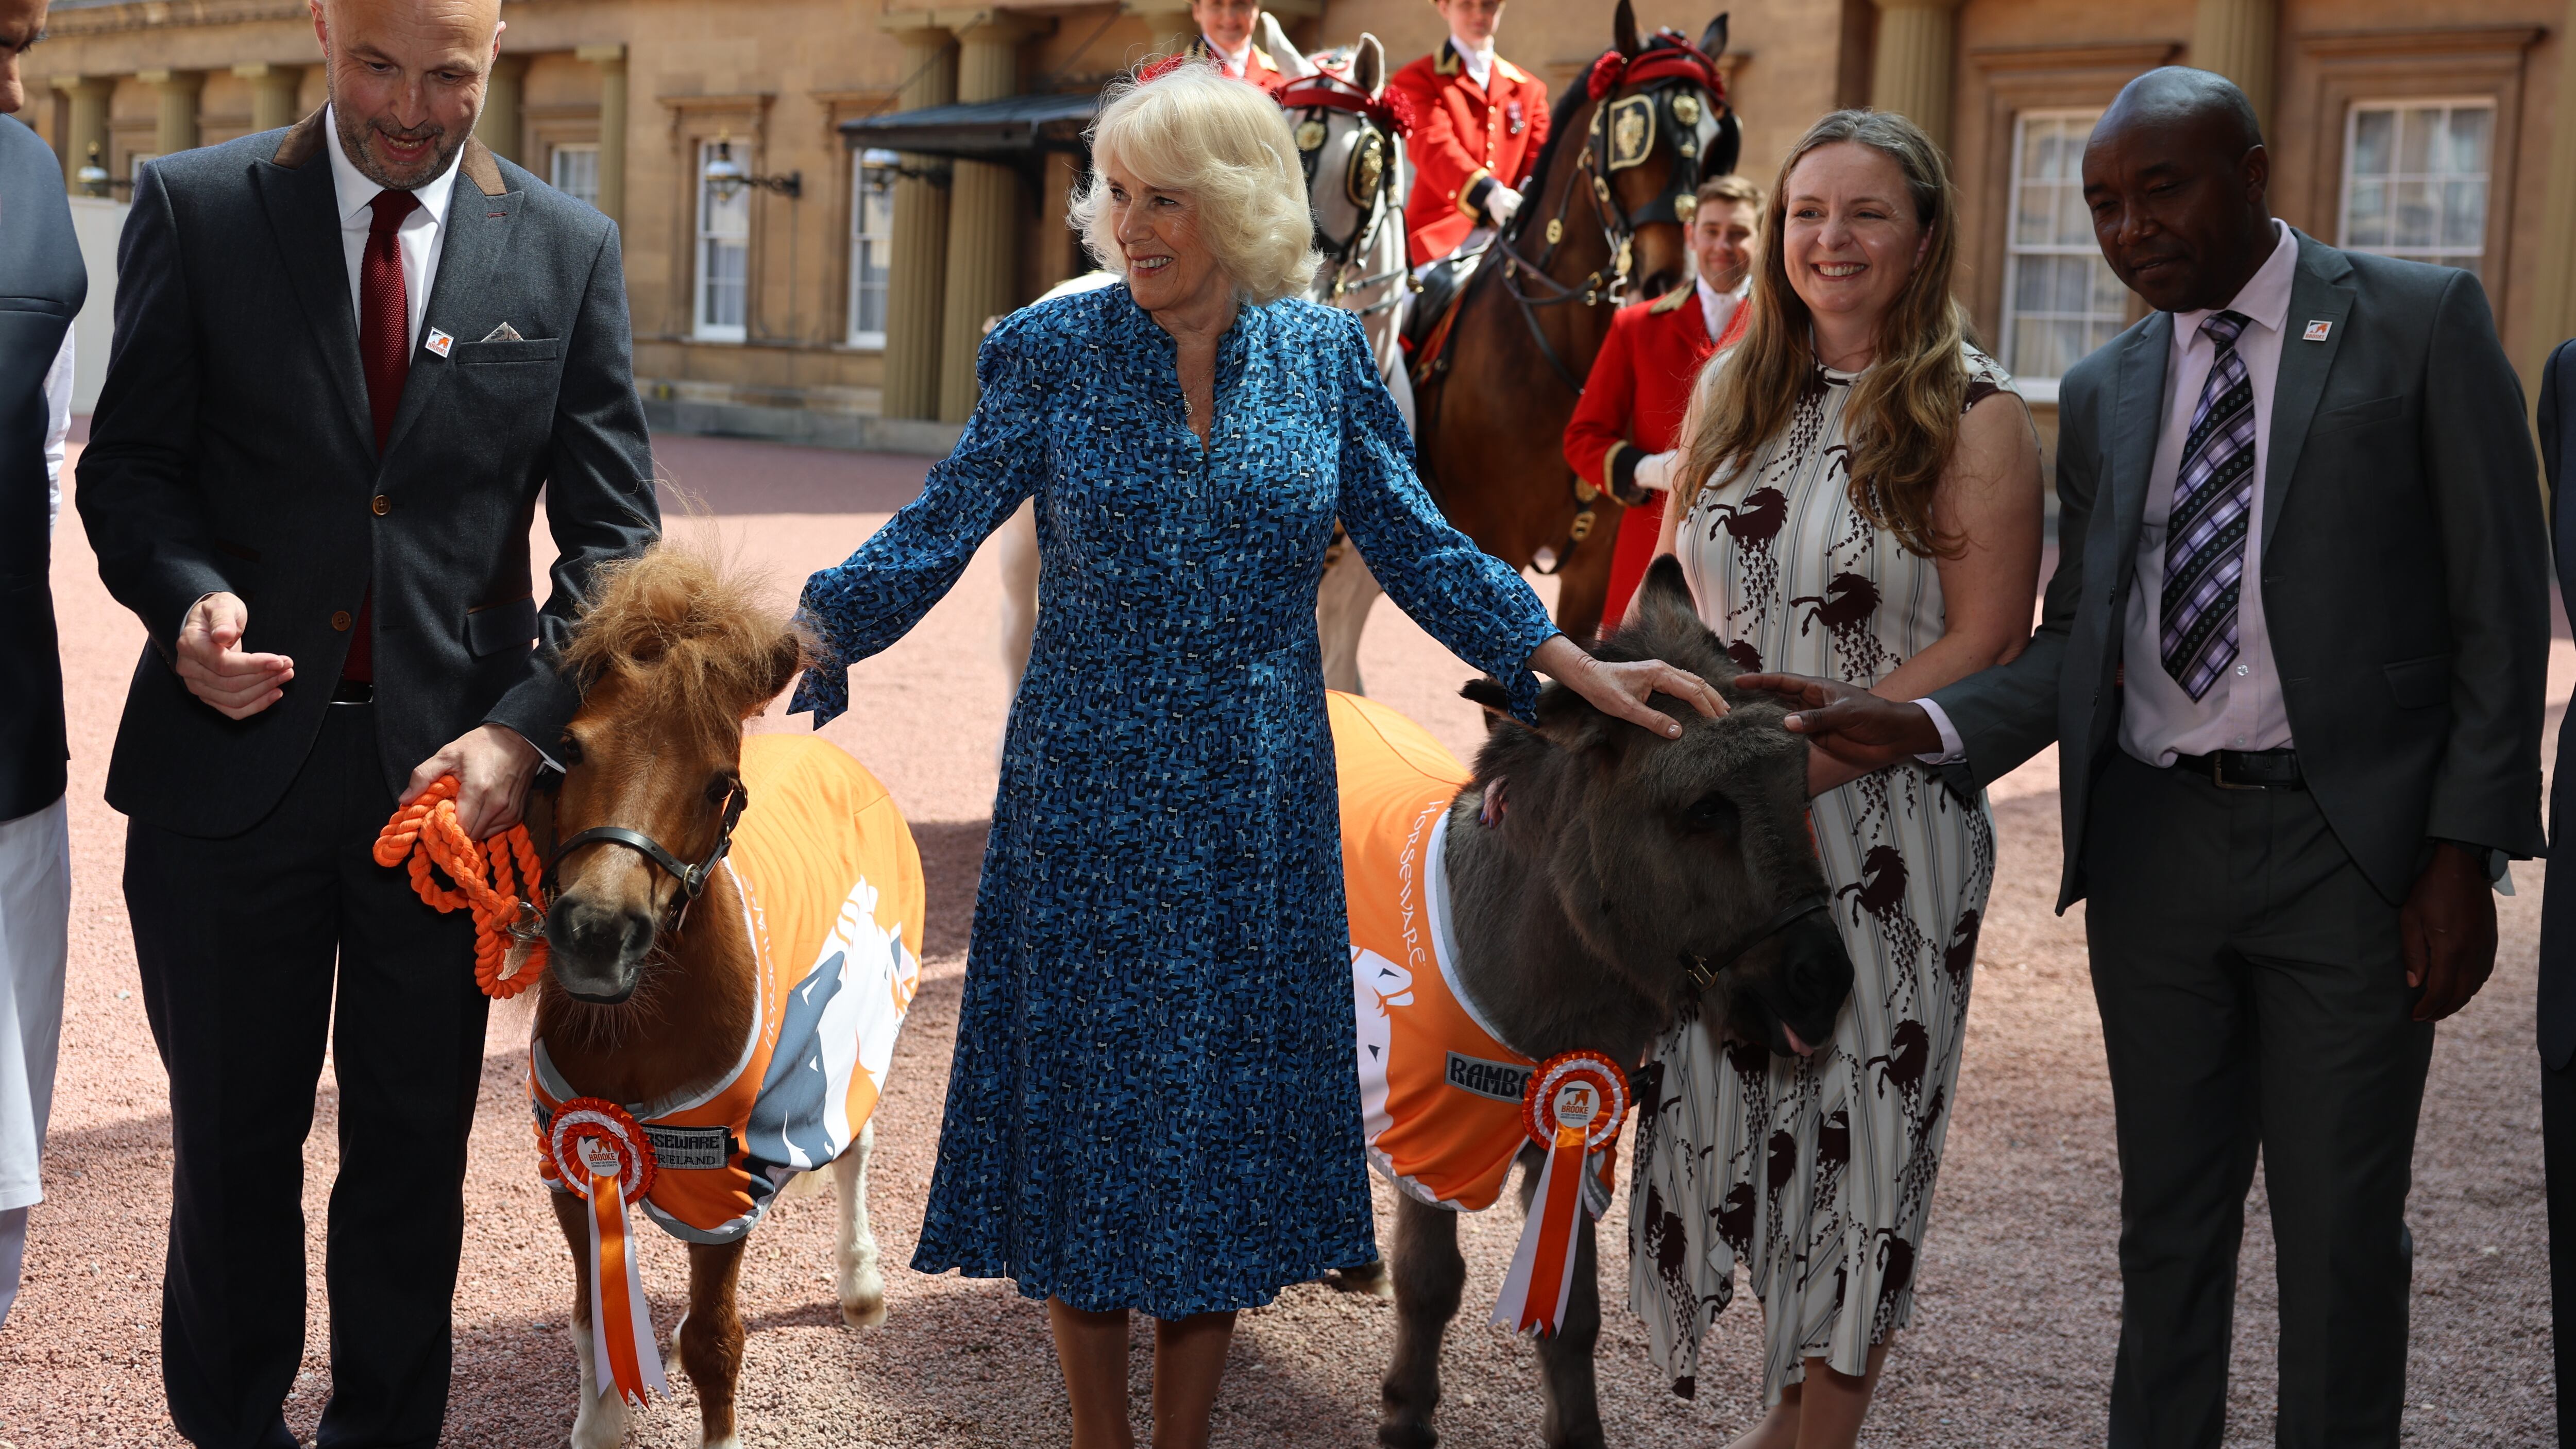 Camilla spent time with the animals in the Buckingham Palace quadrangle